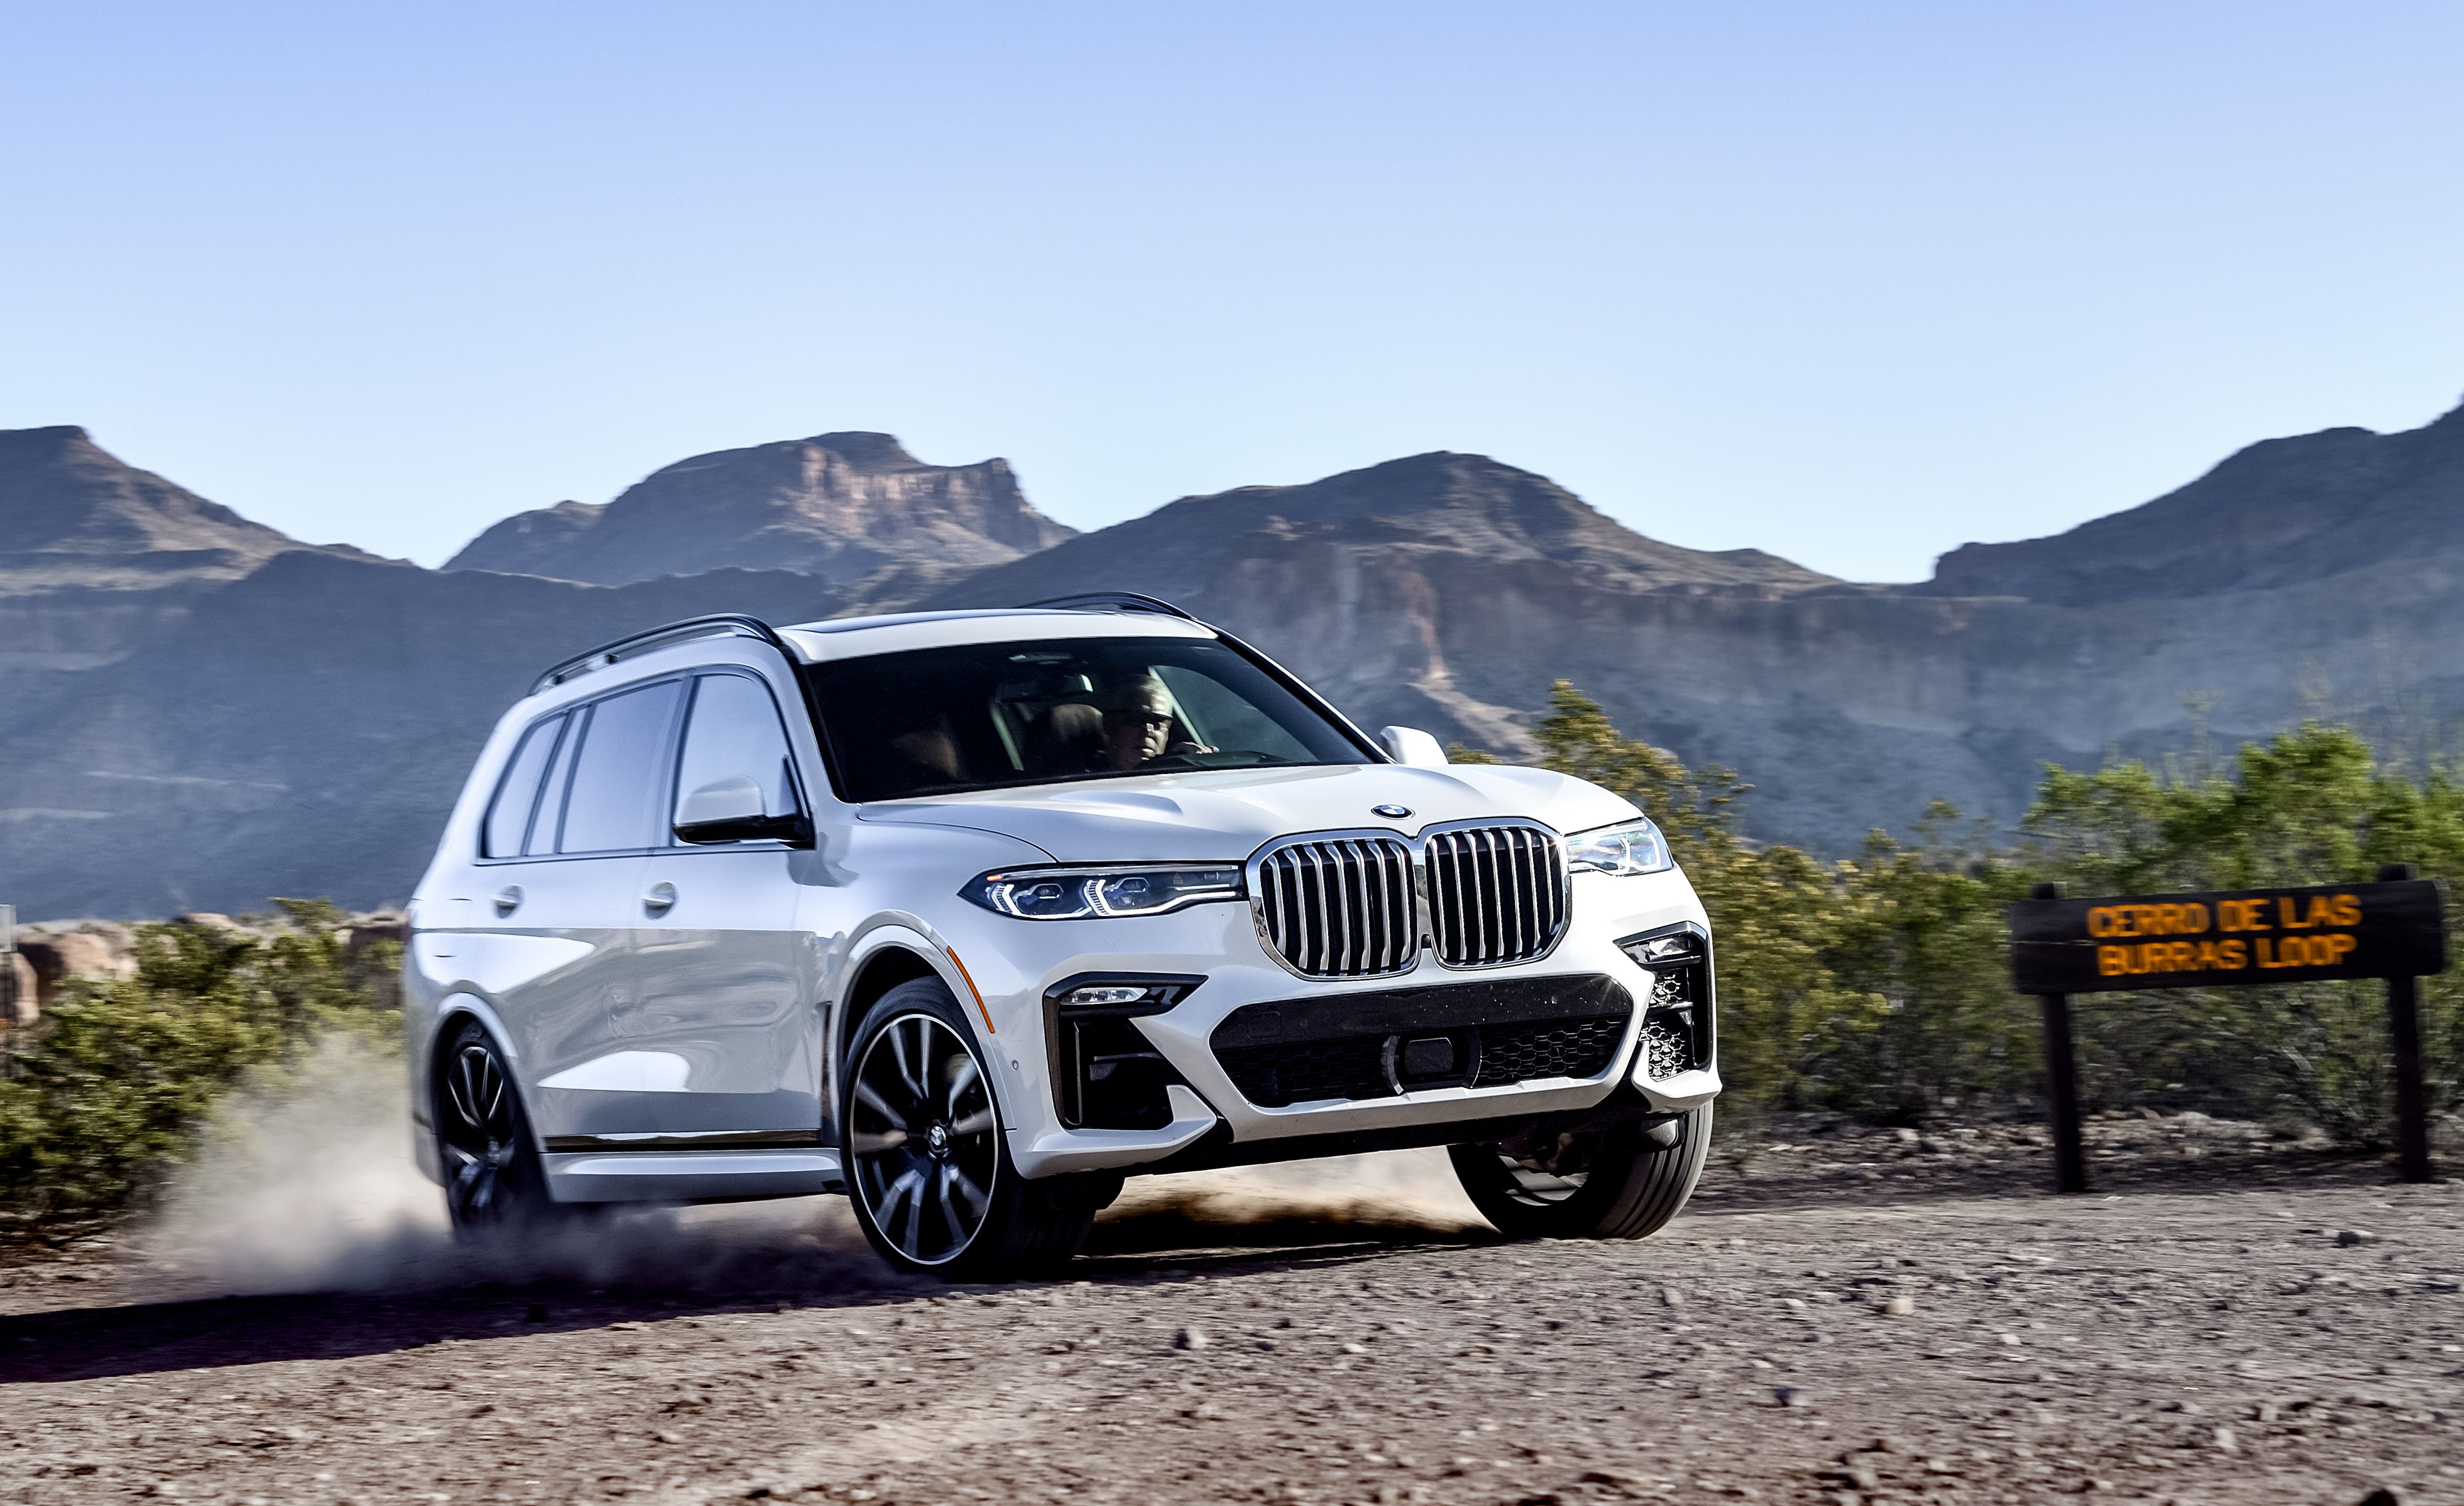 2019 Bmw X7 Is A 3 Row Luxury Suv That S Impossible To Overlook